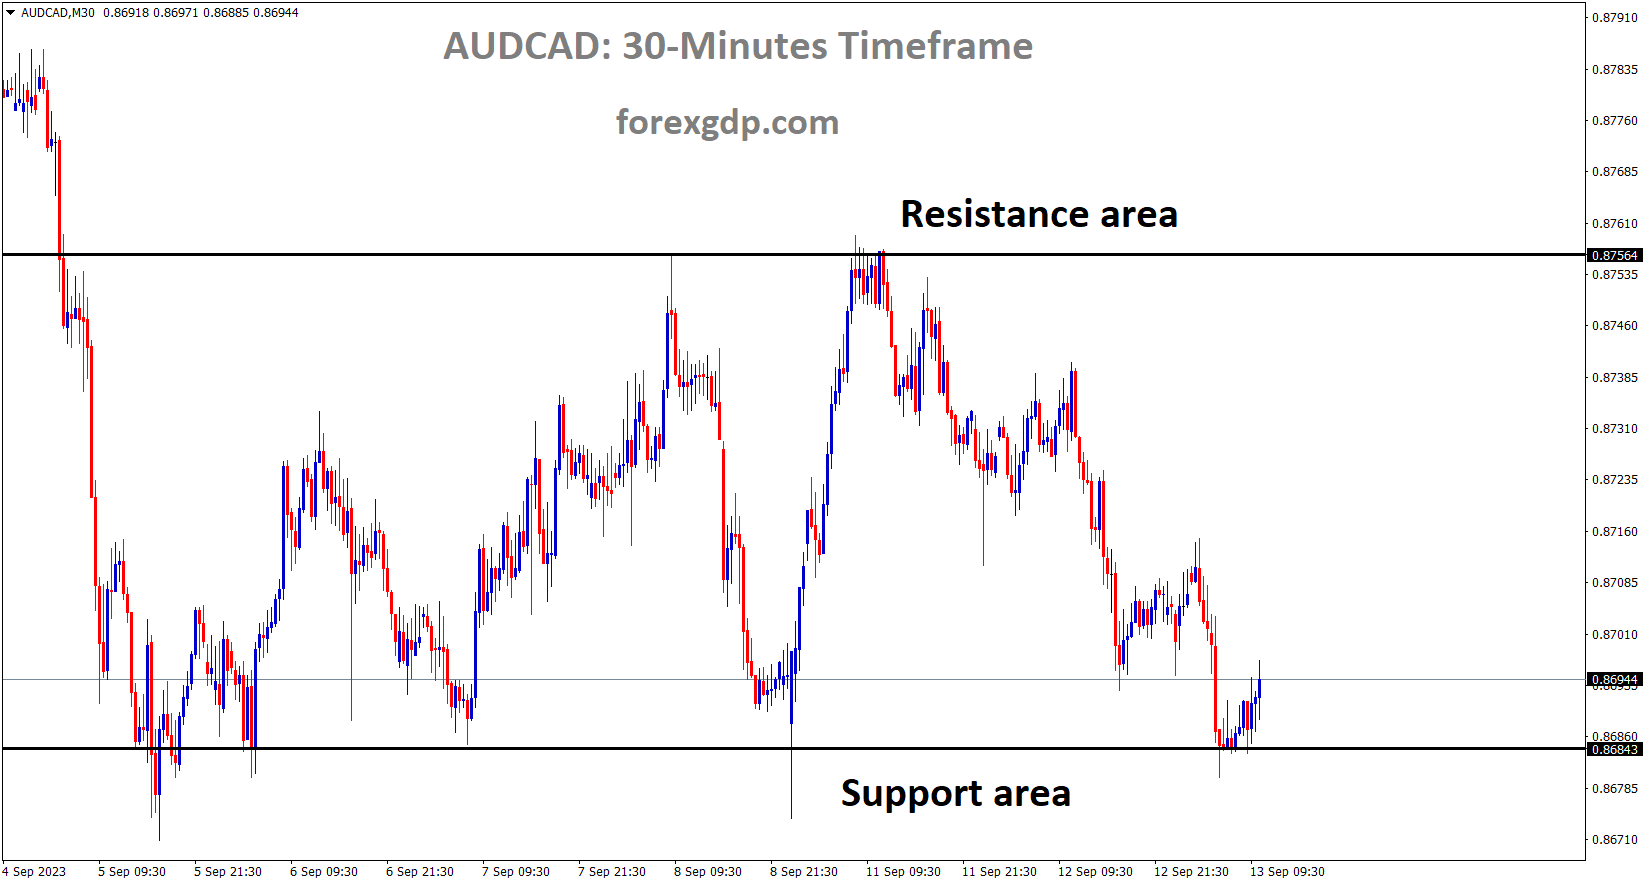 AUDCAD is moving in Box pattern and market has rebounded from the support area of the pattern